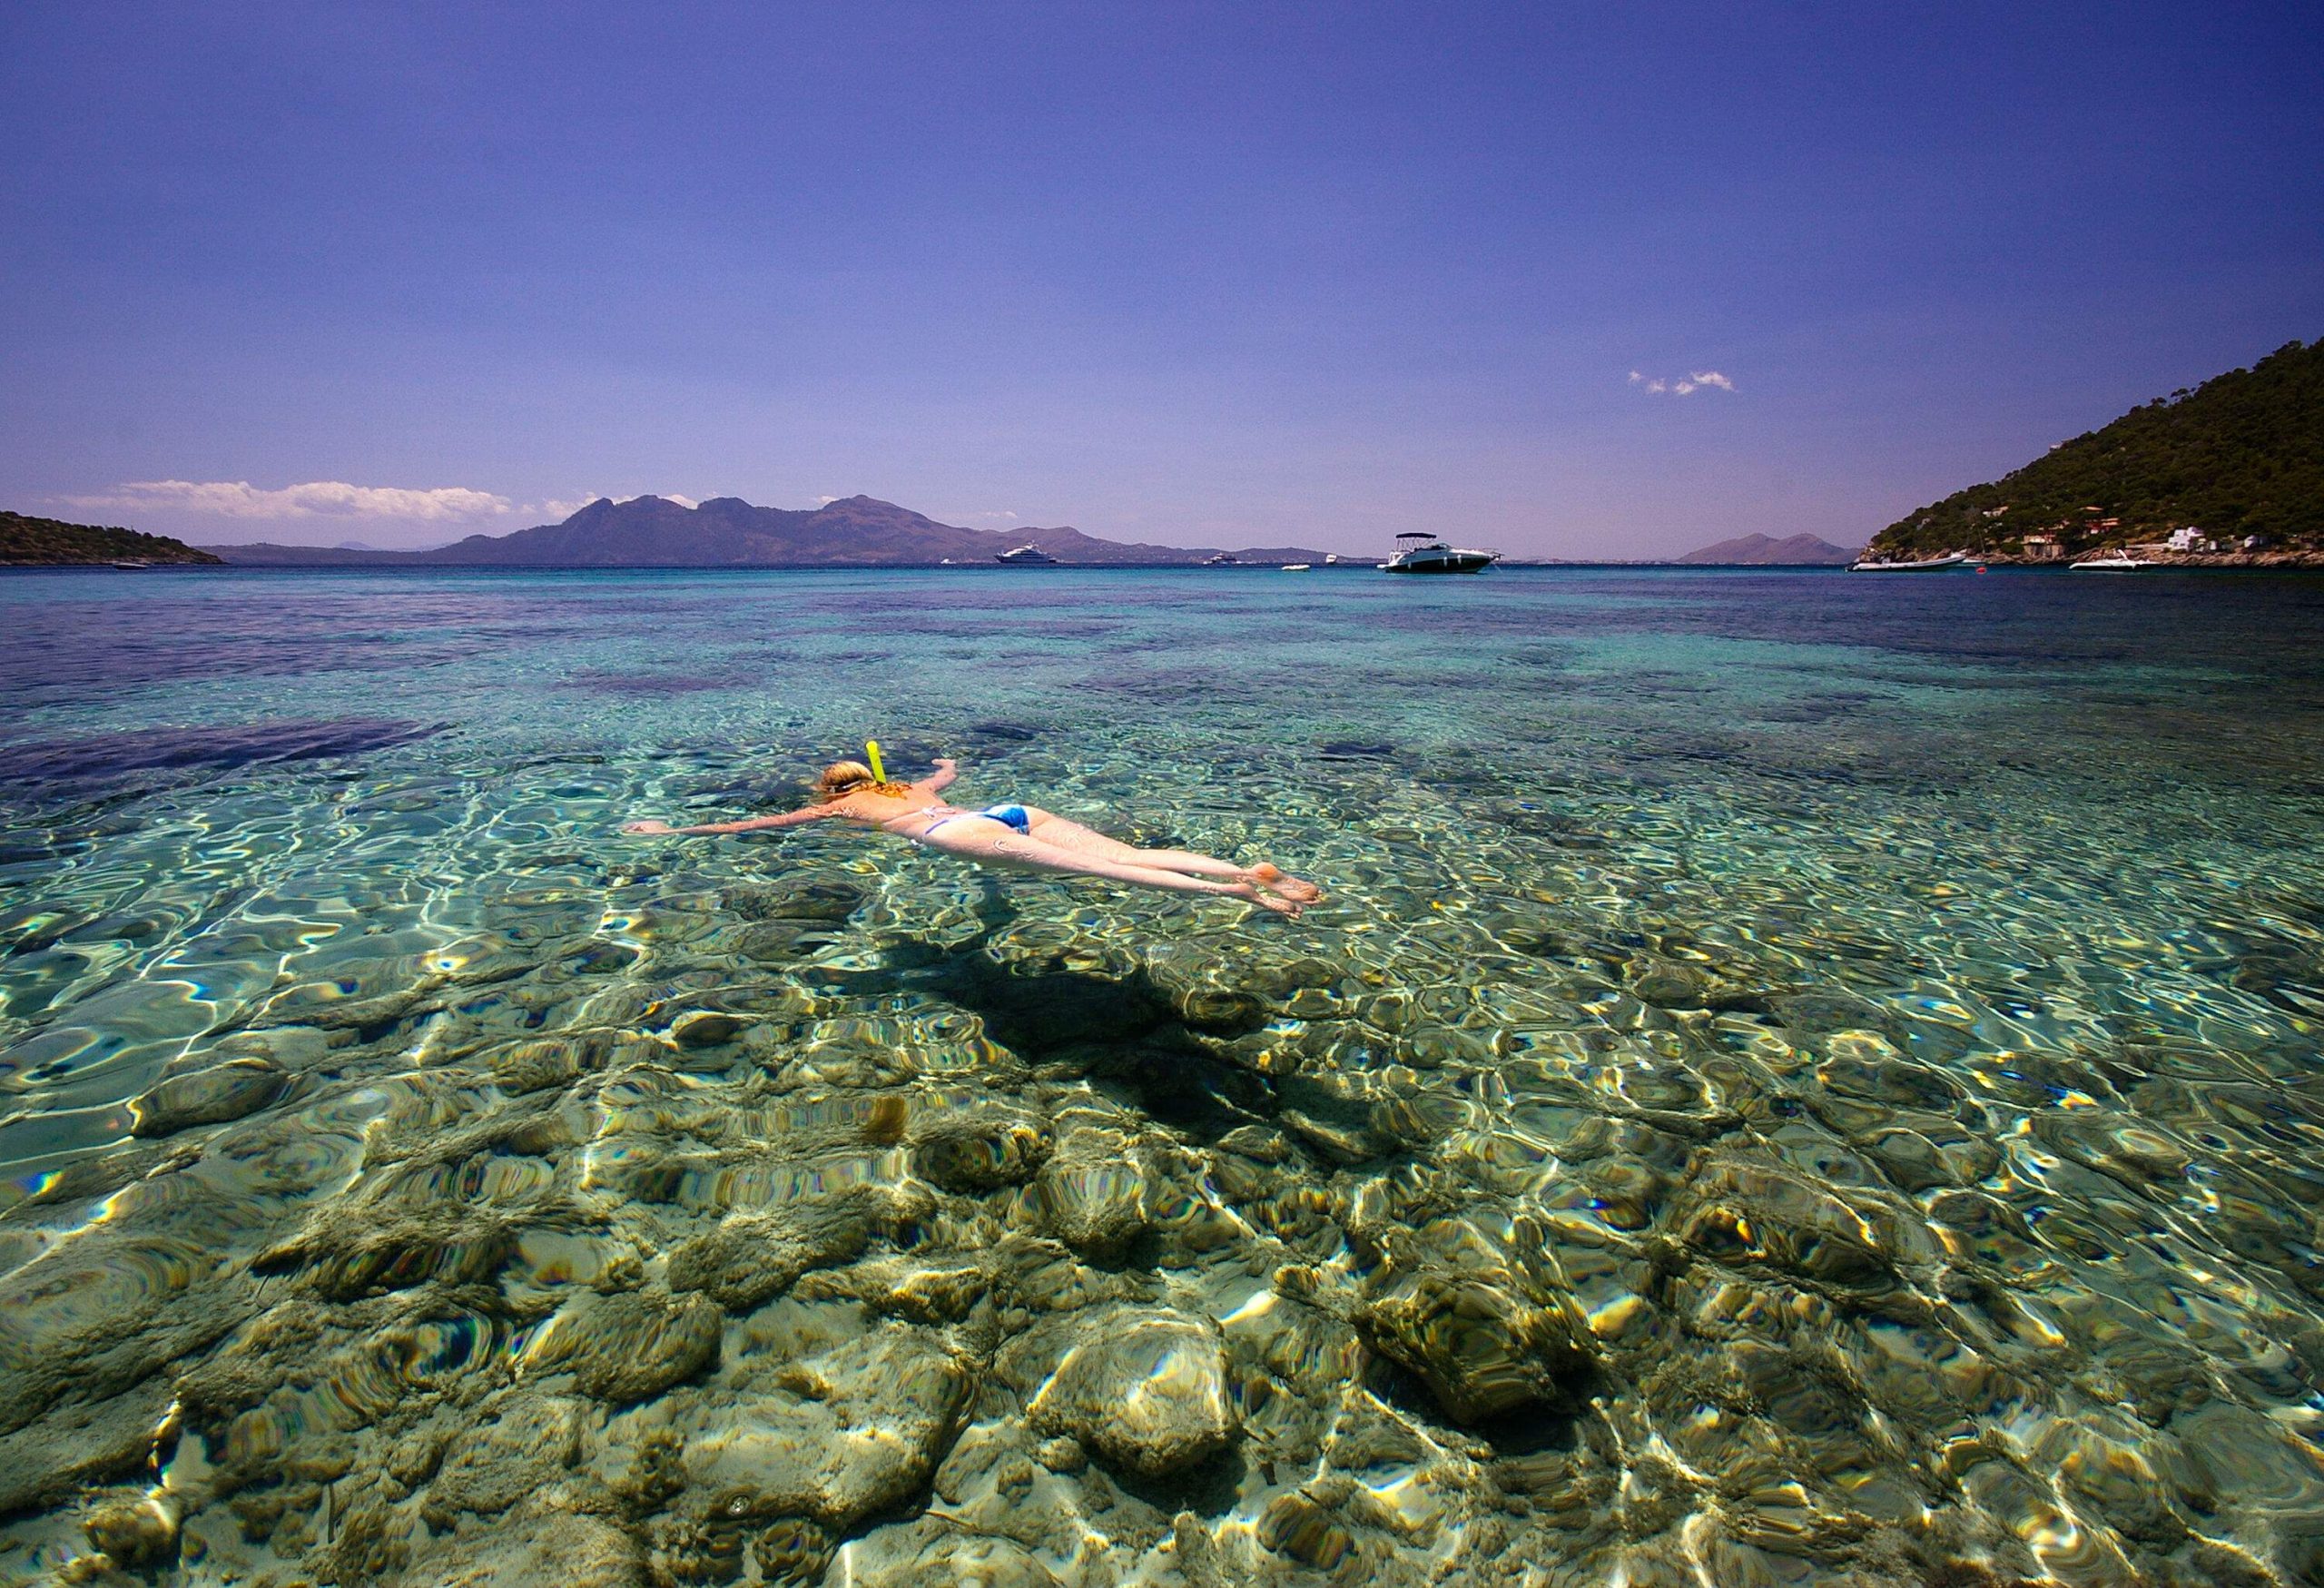 A woman in a bathing suit snorkels across the clear waters of a beach.